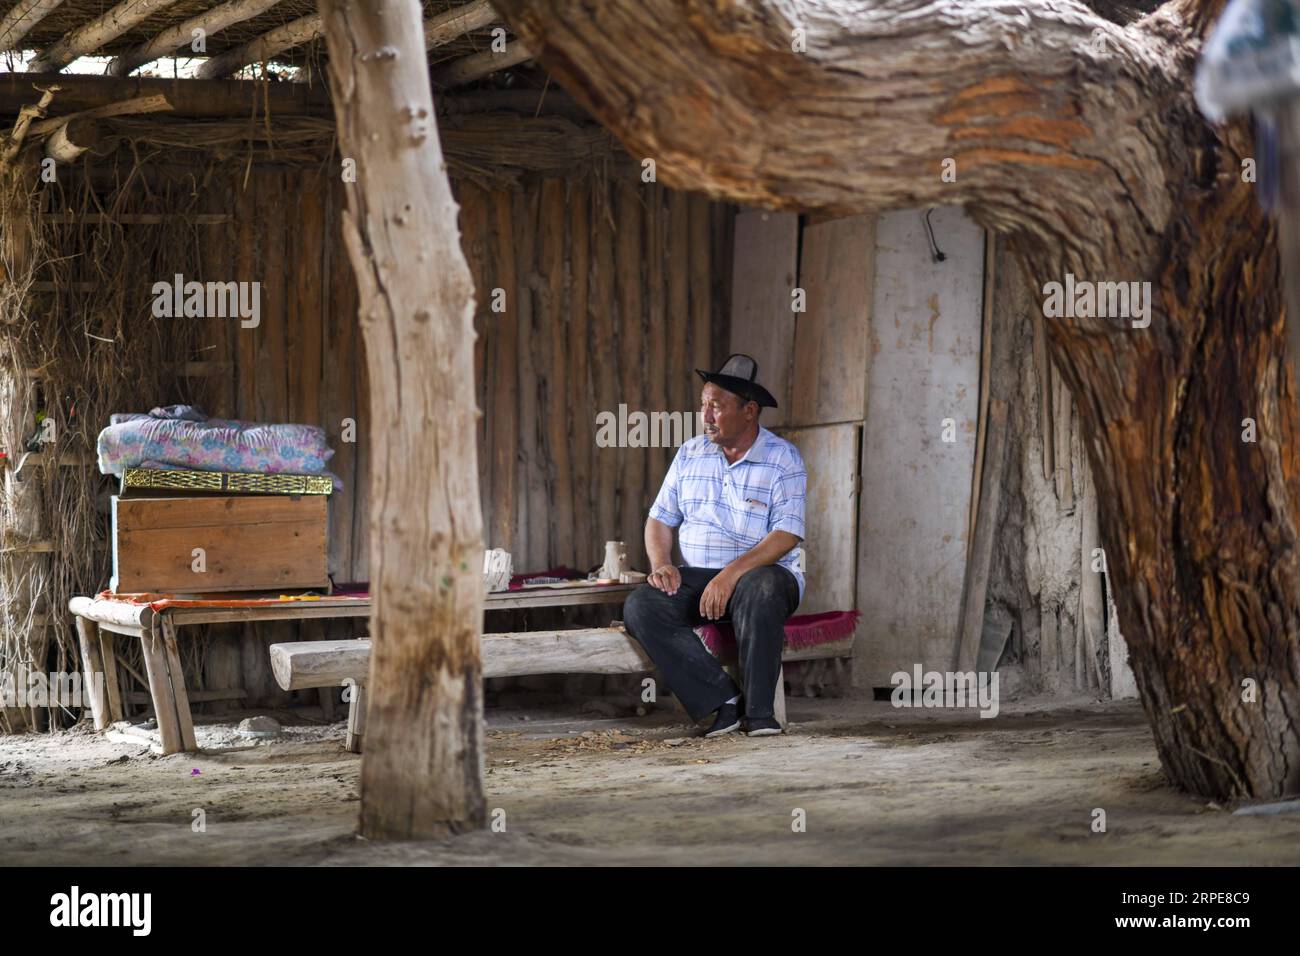 (190821) -- YULI, Aug. 21, 2019 -- Amudun Abudu rests at home in Lop Nur People Village in Yuli County, northwest China s Xinjiang Uygur Autonomous Region, June 21, 2019. Lop Nur People Village is located in Yuli County, where Tarim River flows through the deserts with populus euphratica forests reflection on the shimmering waves. Amudun Abudu, a 61-year old typical Lop Nur villager, works in local tourism industry. With the changes of the times, many Lop Nur people have various options for a living, yet he insists on the tradition of fishing in rivers and lakes. Not only does he make deliciou Stock Photo